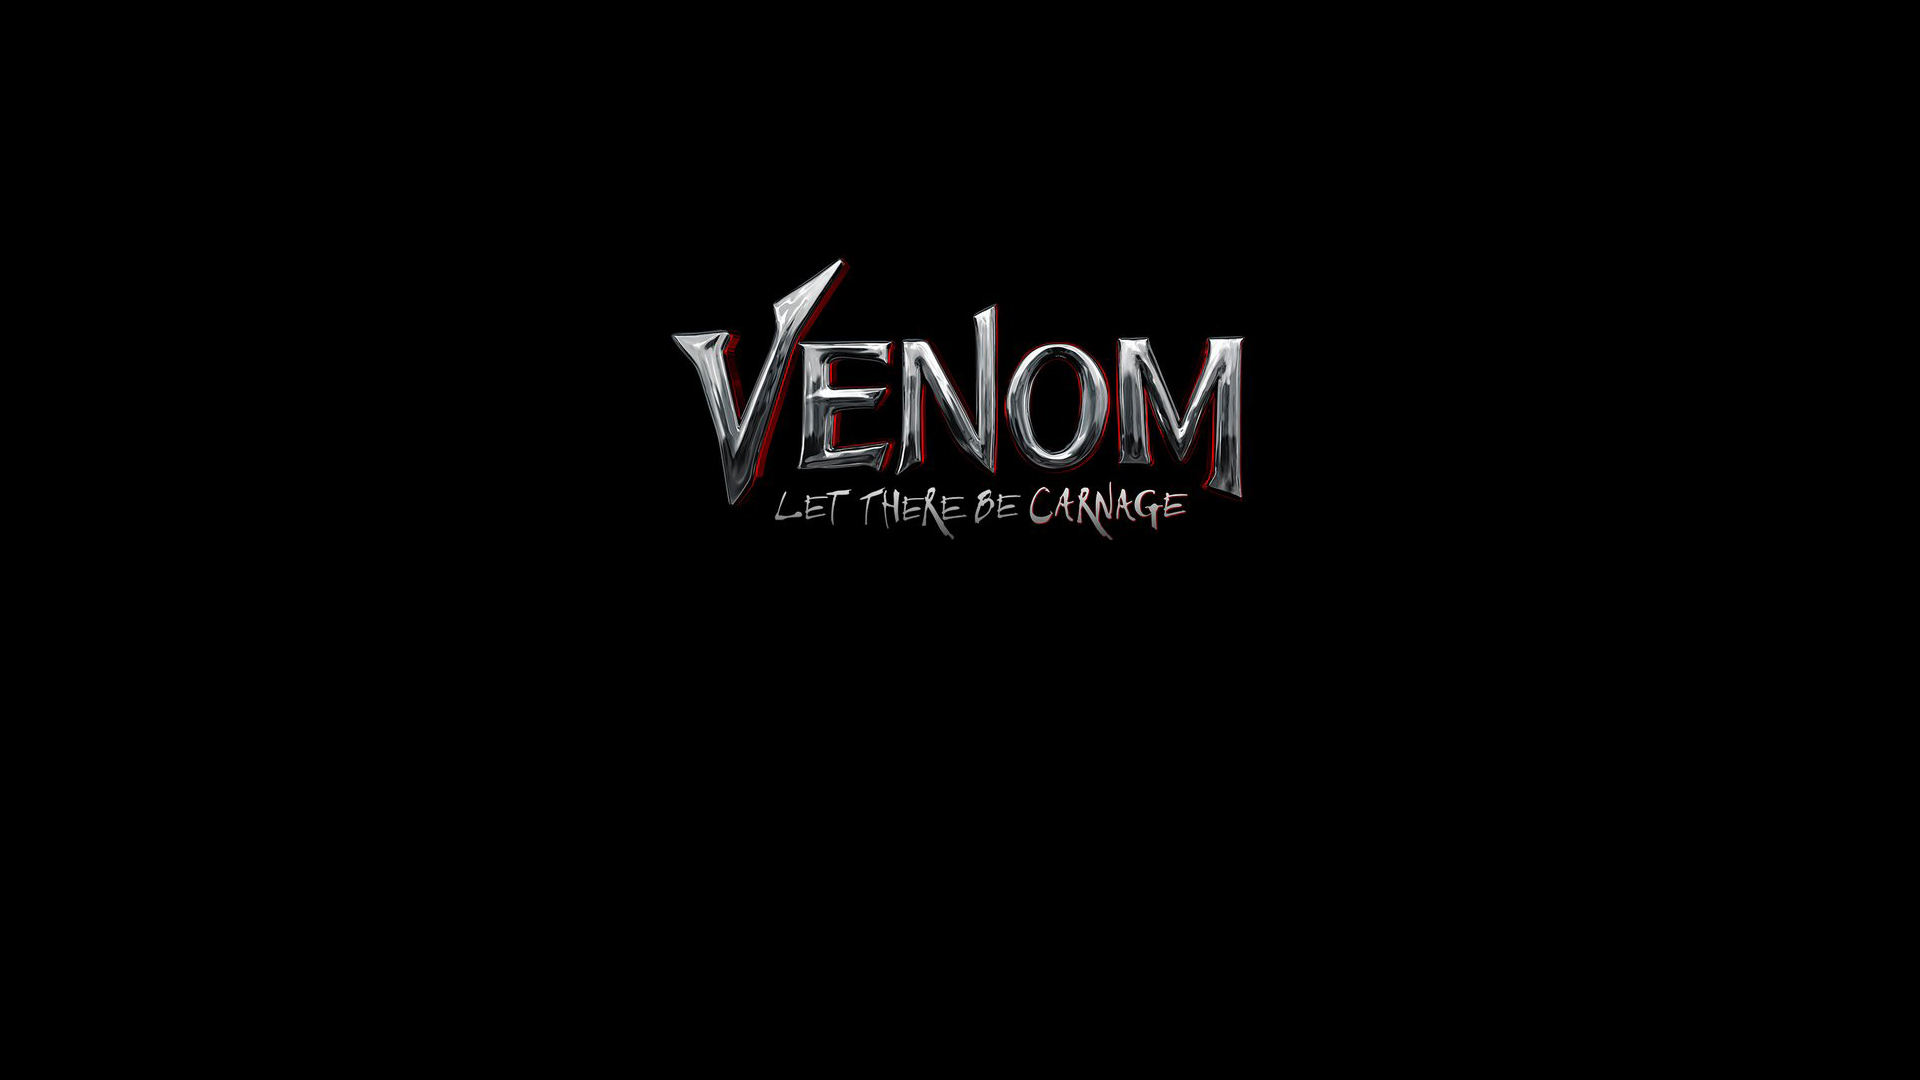 Venom Hd Wallpaper For Android Phone